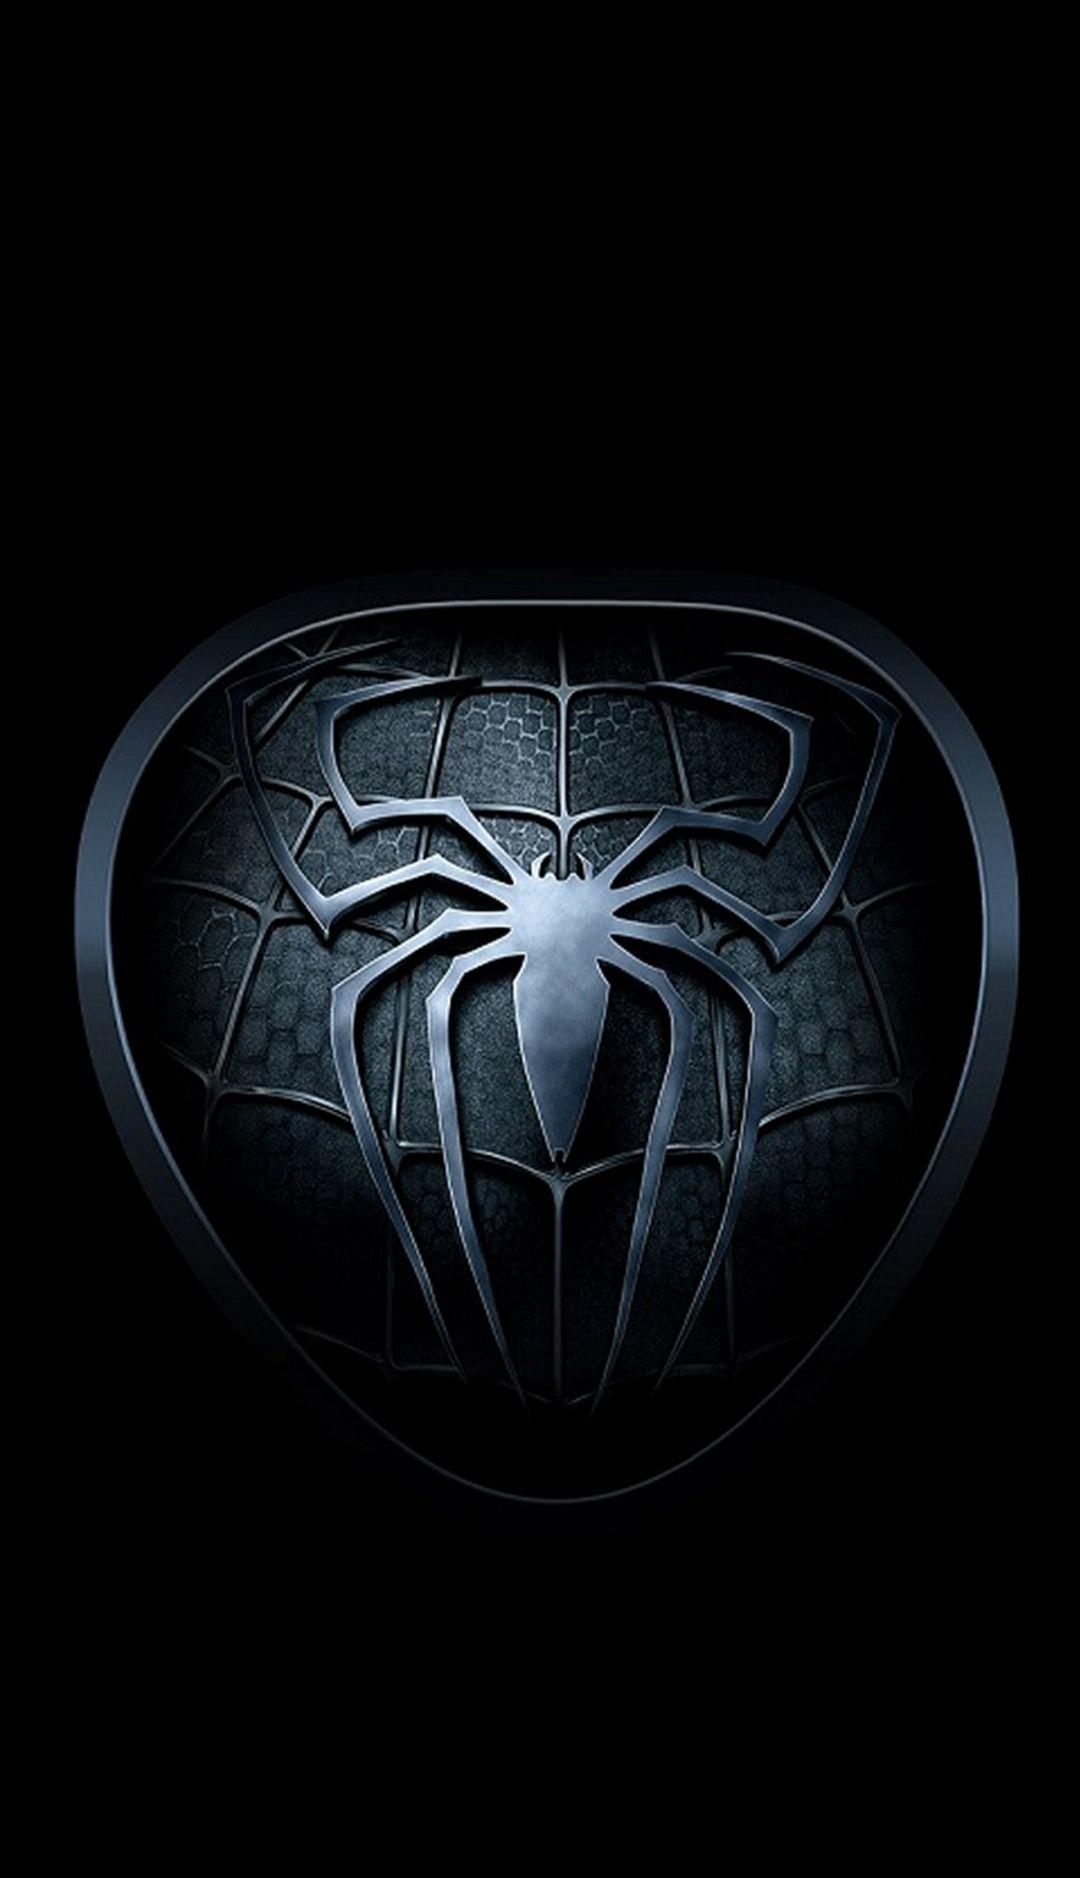 HD Wallpaper For Android Phone You Must Have. Black spiderman